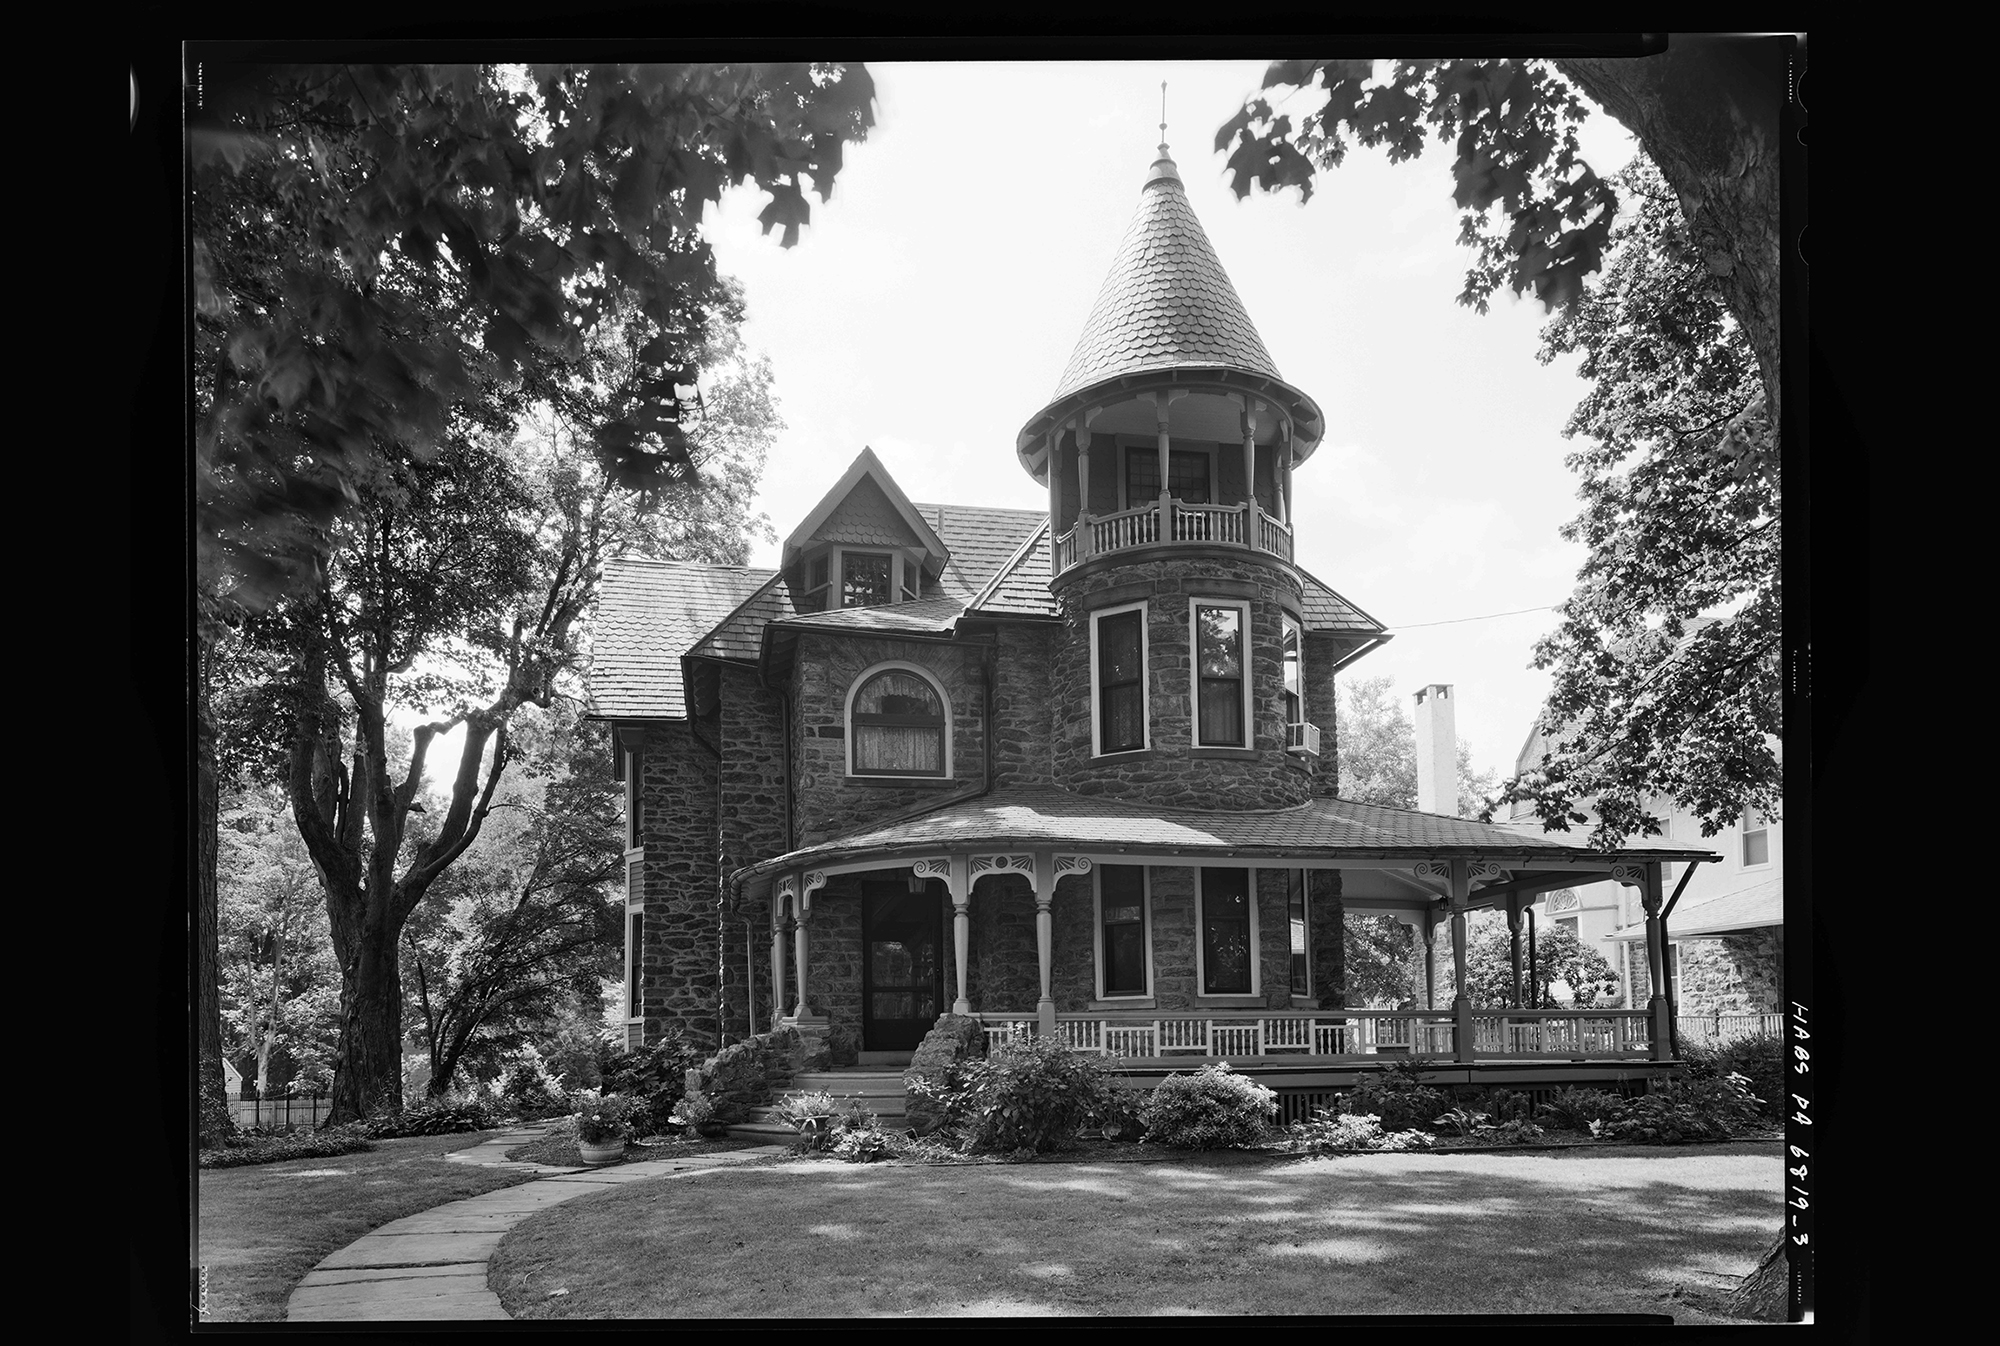 three-story house with a porch and a turret